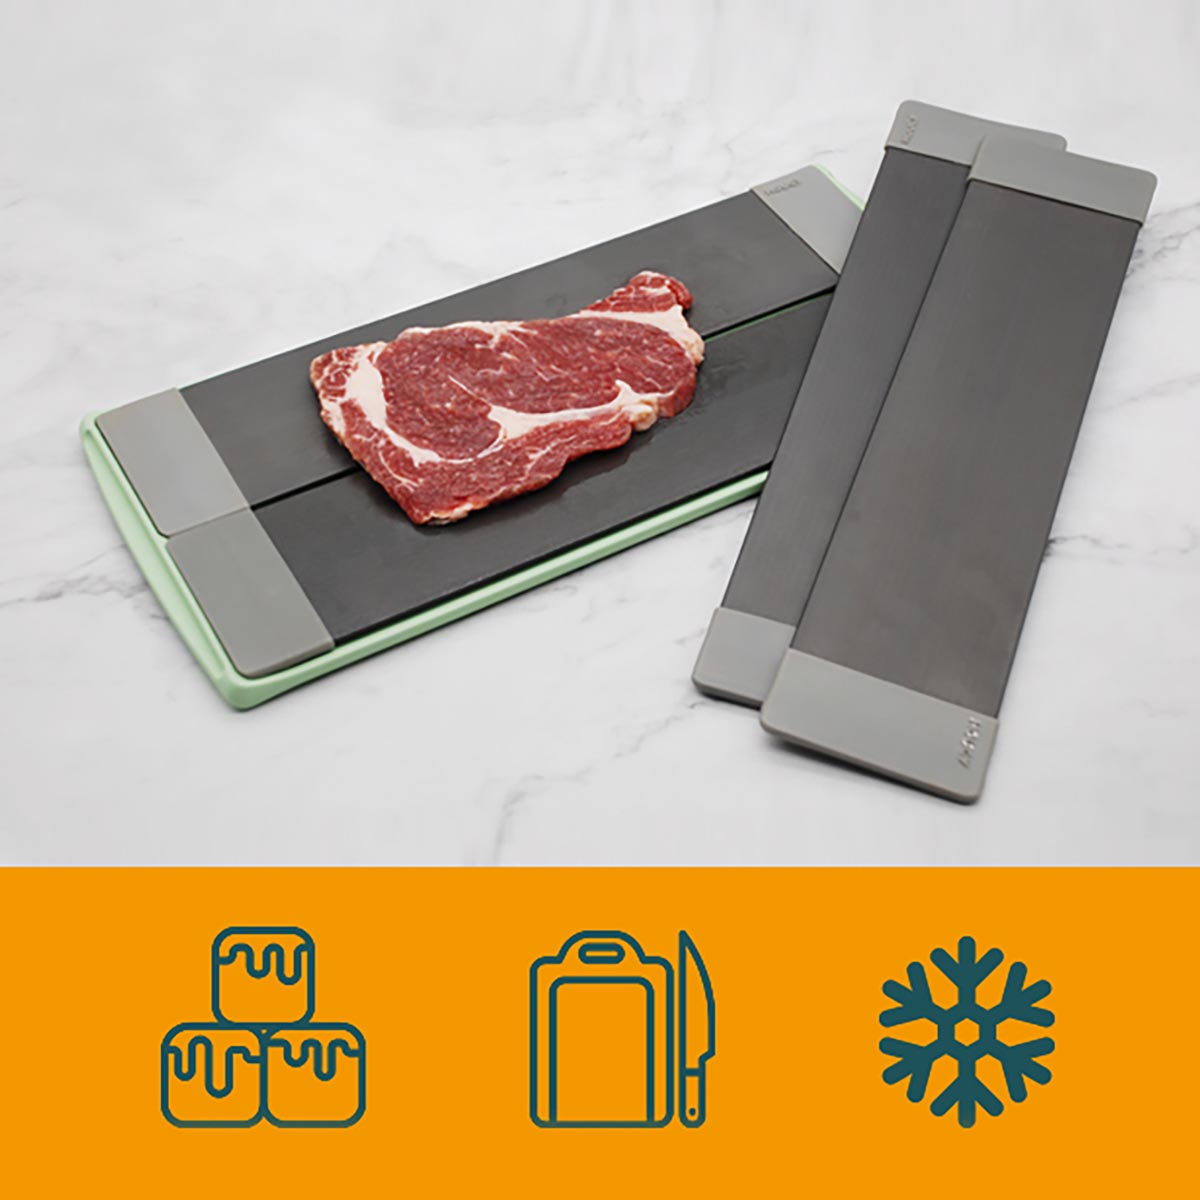 Houcy 3 in 1 Defrosting Tray